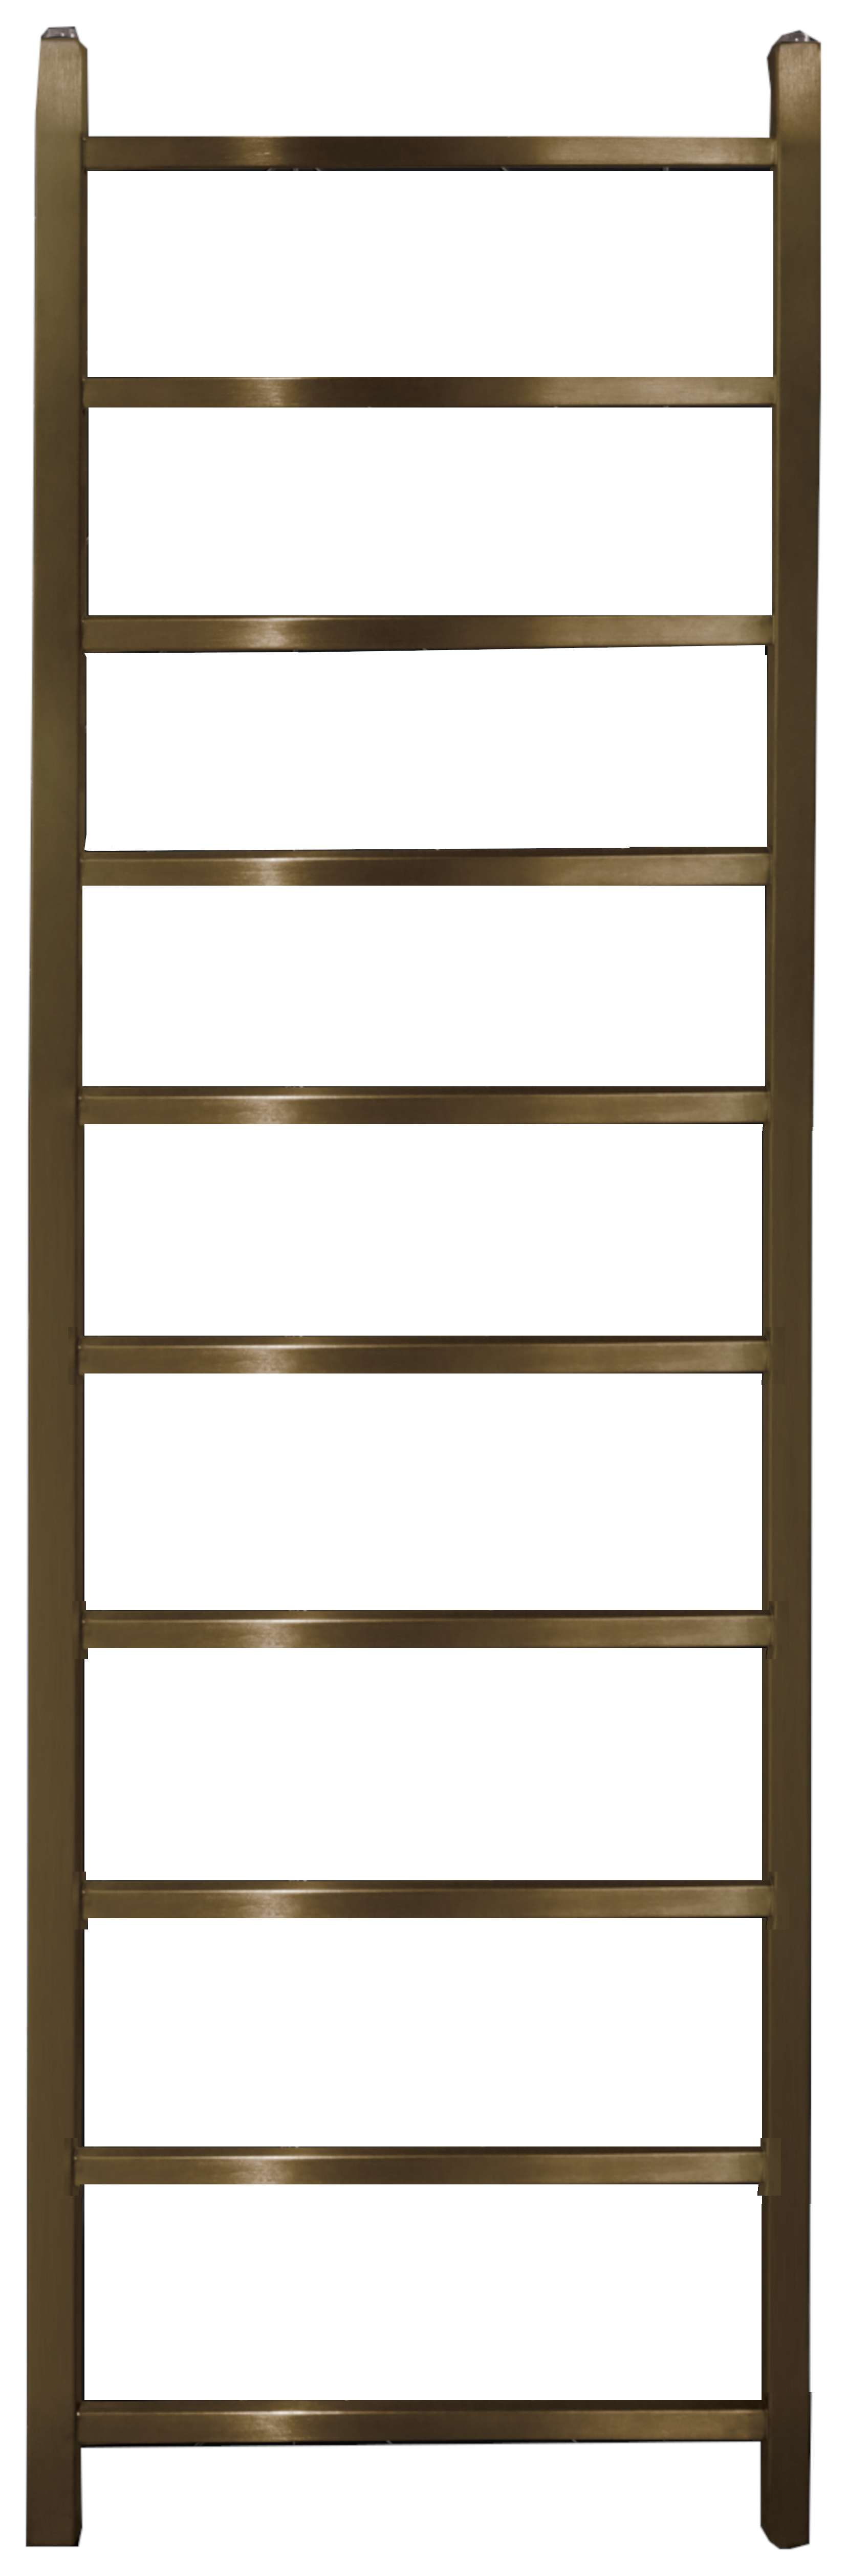 Image of Towelrads Diva Brushed Brass Dry Electric Non Thermostatic Towel Radiator - 1500 x 500mm